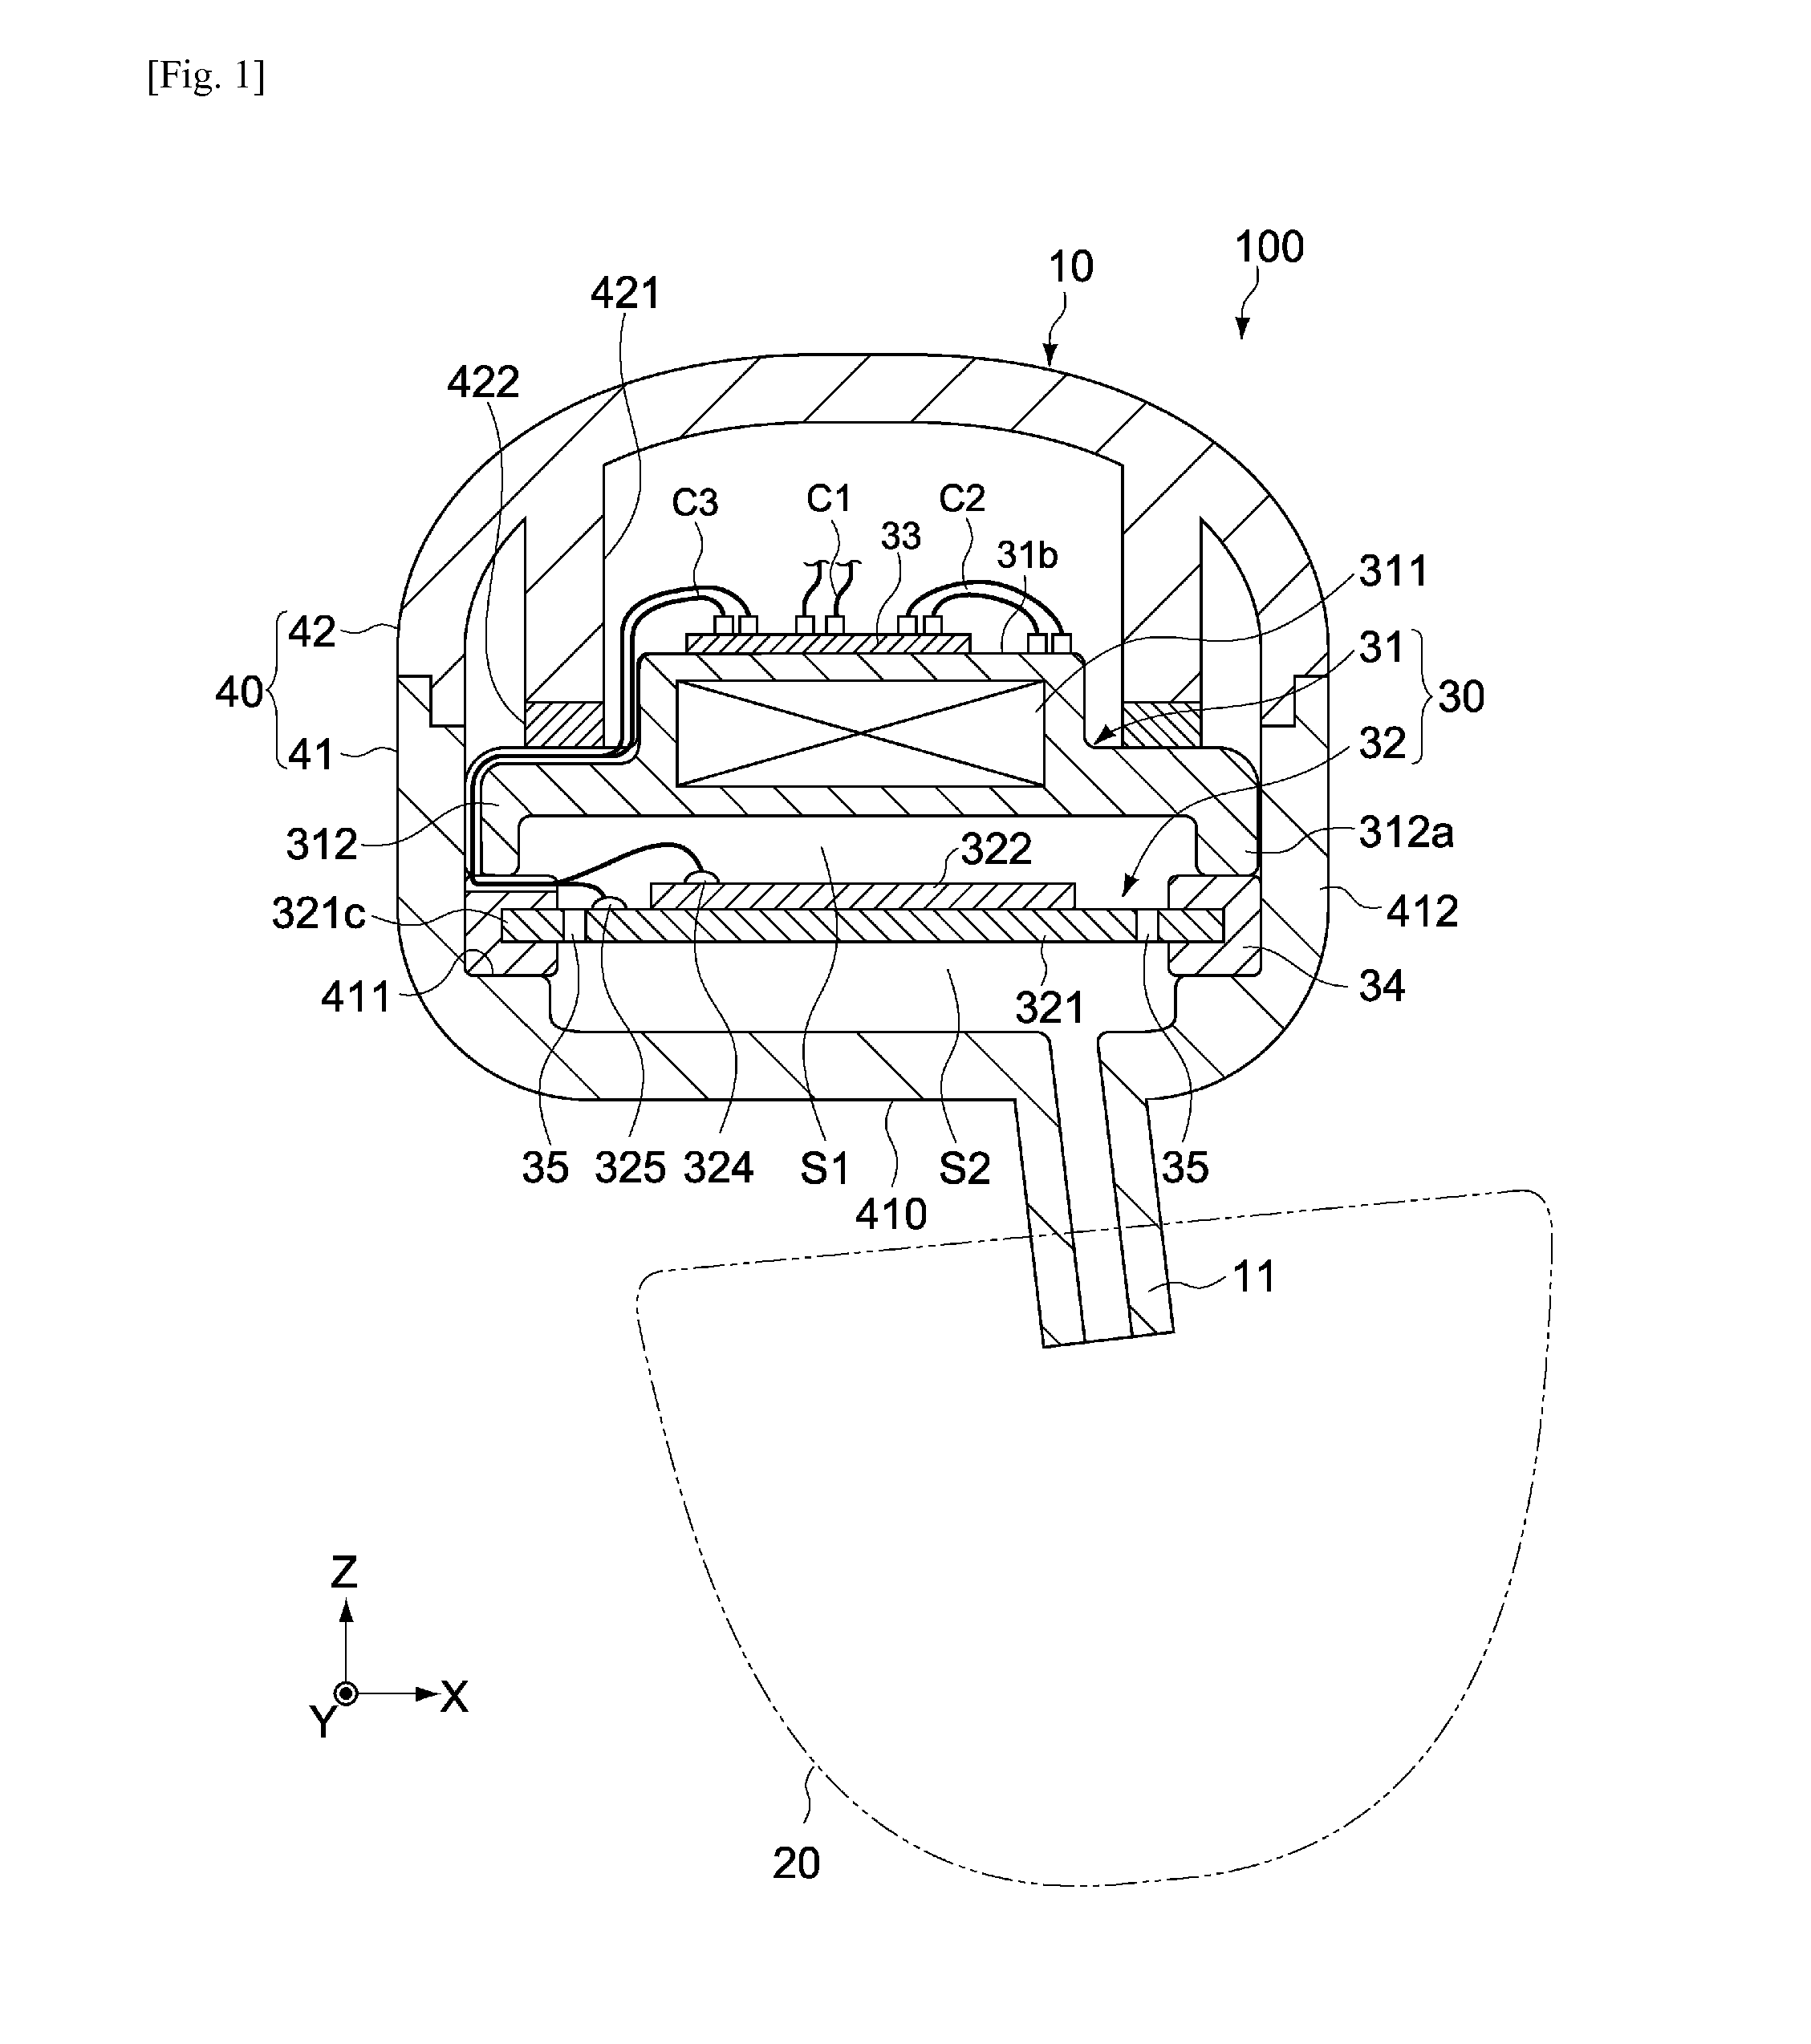 Electroacoustic converter